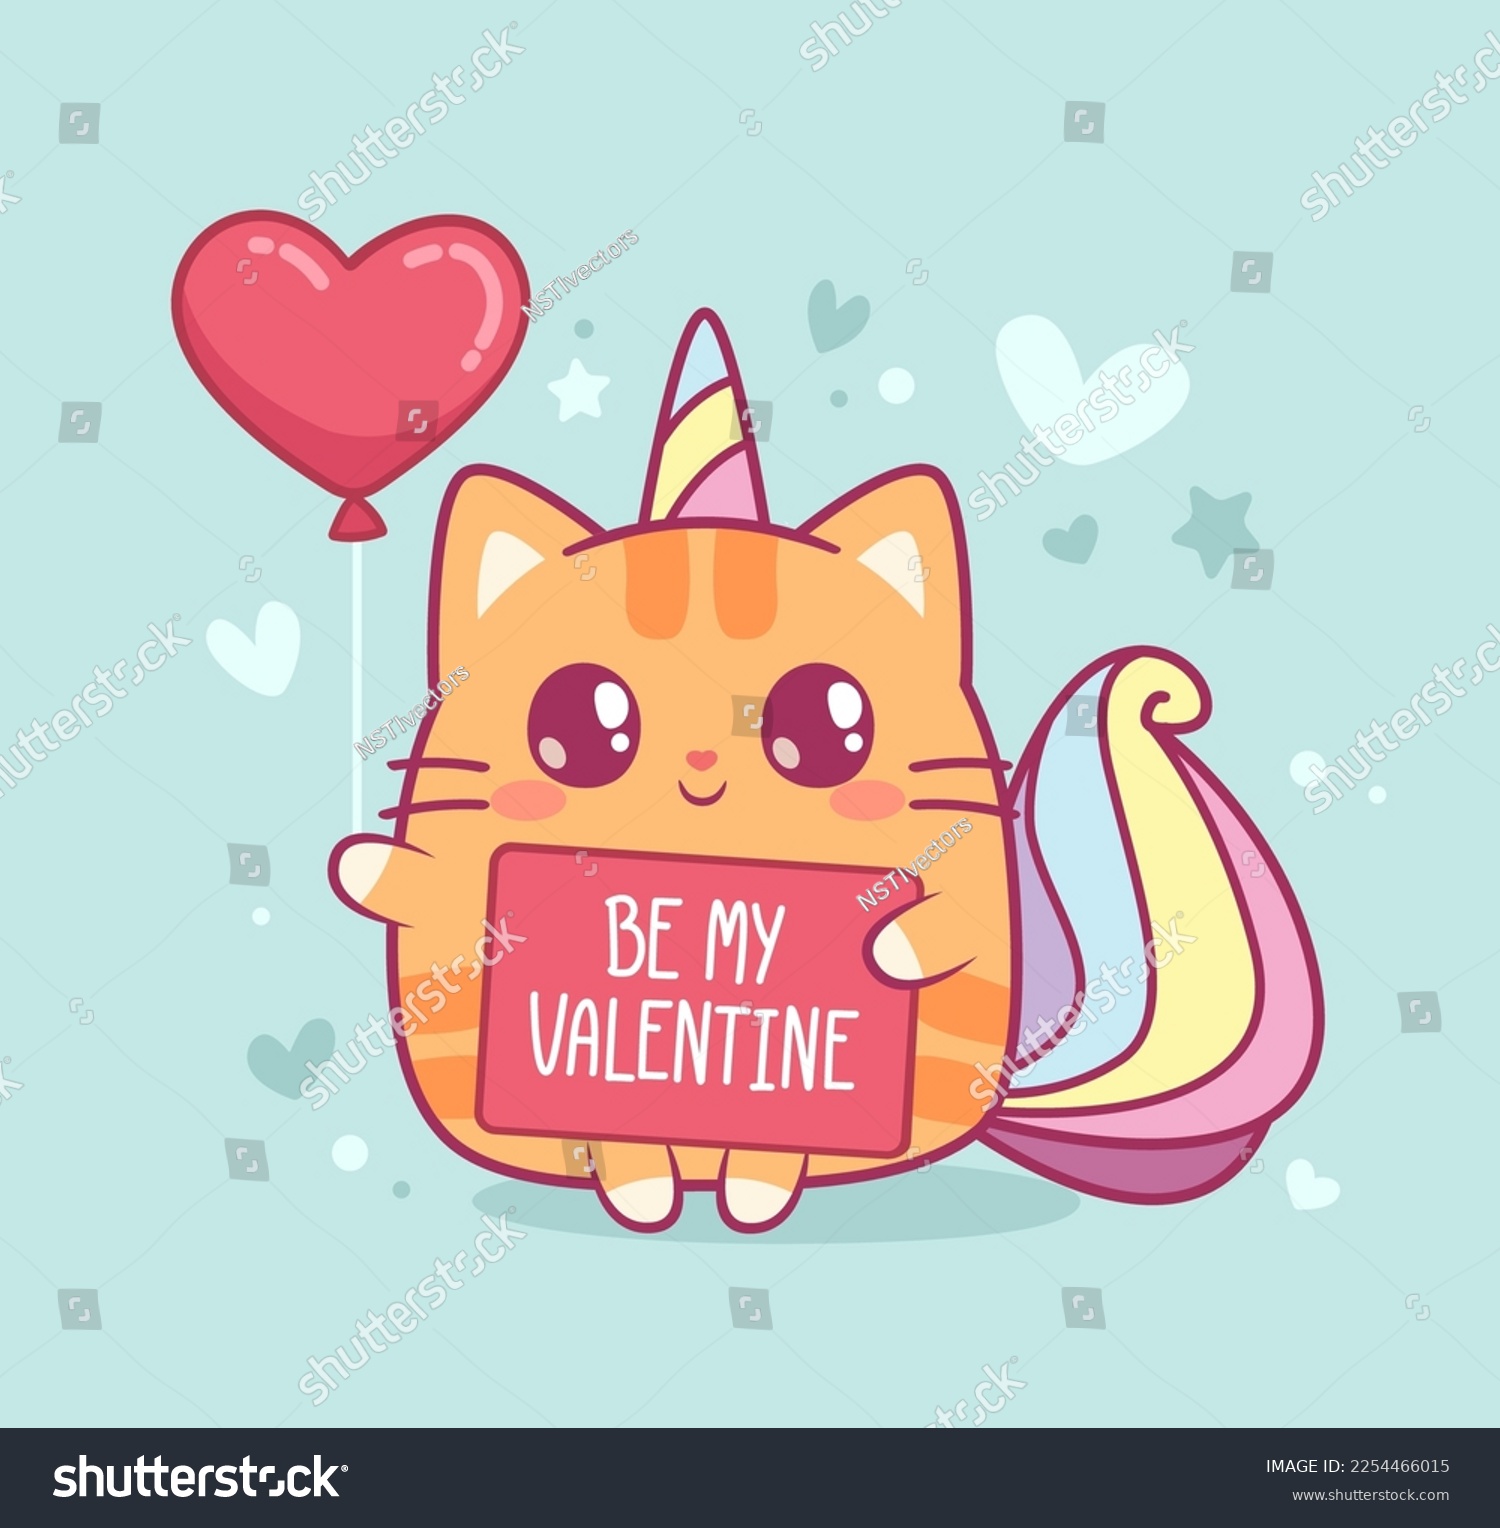 SVG of Cute Valentine's Day card with Caticorn kitten or White Cat Unicorn hold heart balloon and hand drawn inscription 